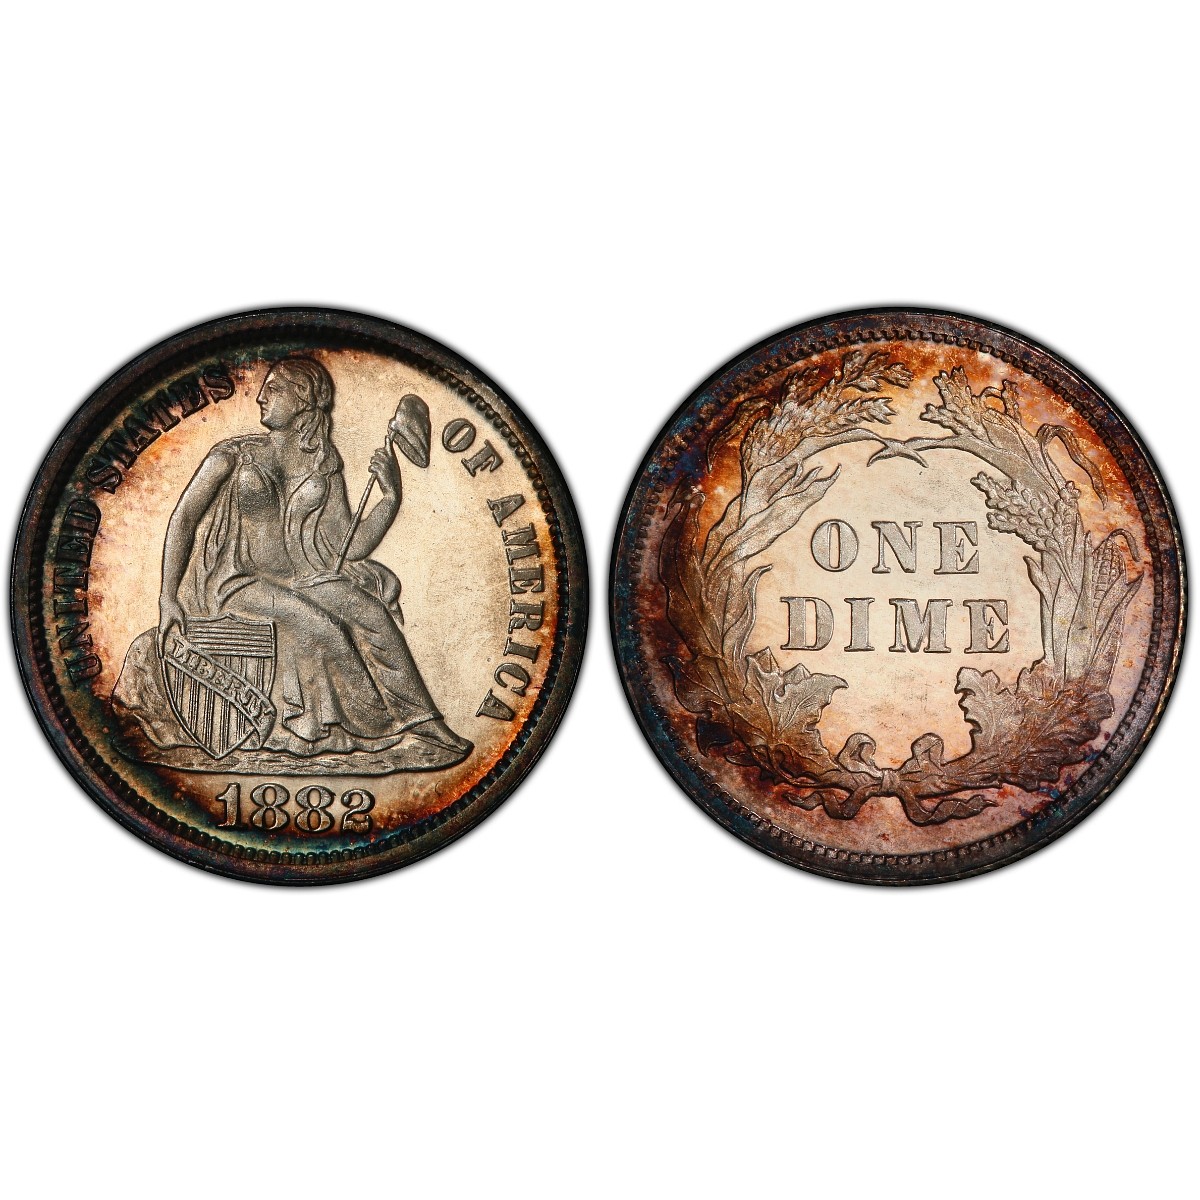 Fine and Decorative Art, Featuring an Important Collection of Numismatics by Revere Auctions